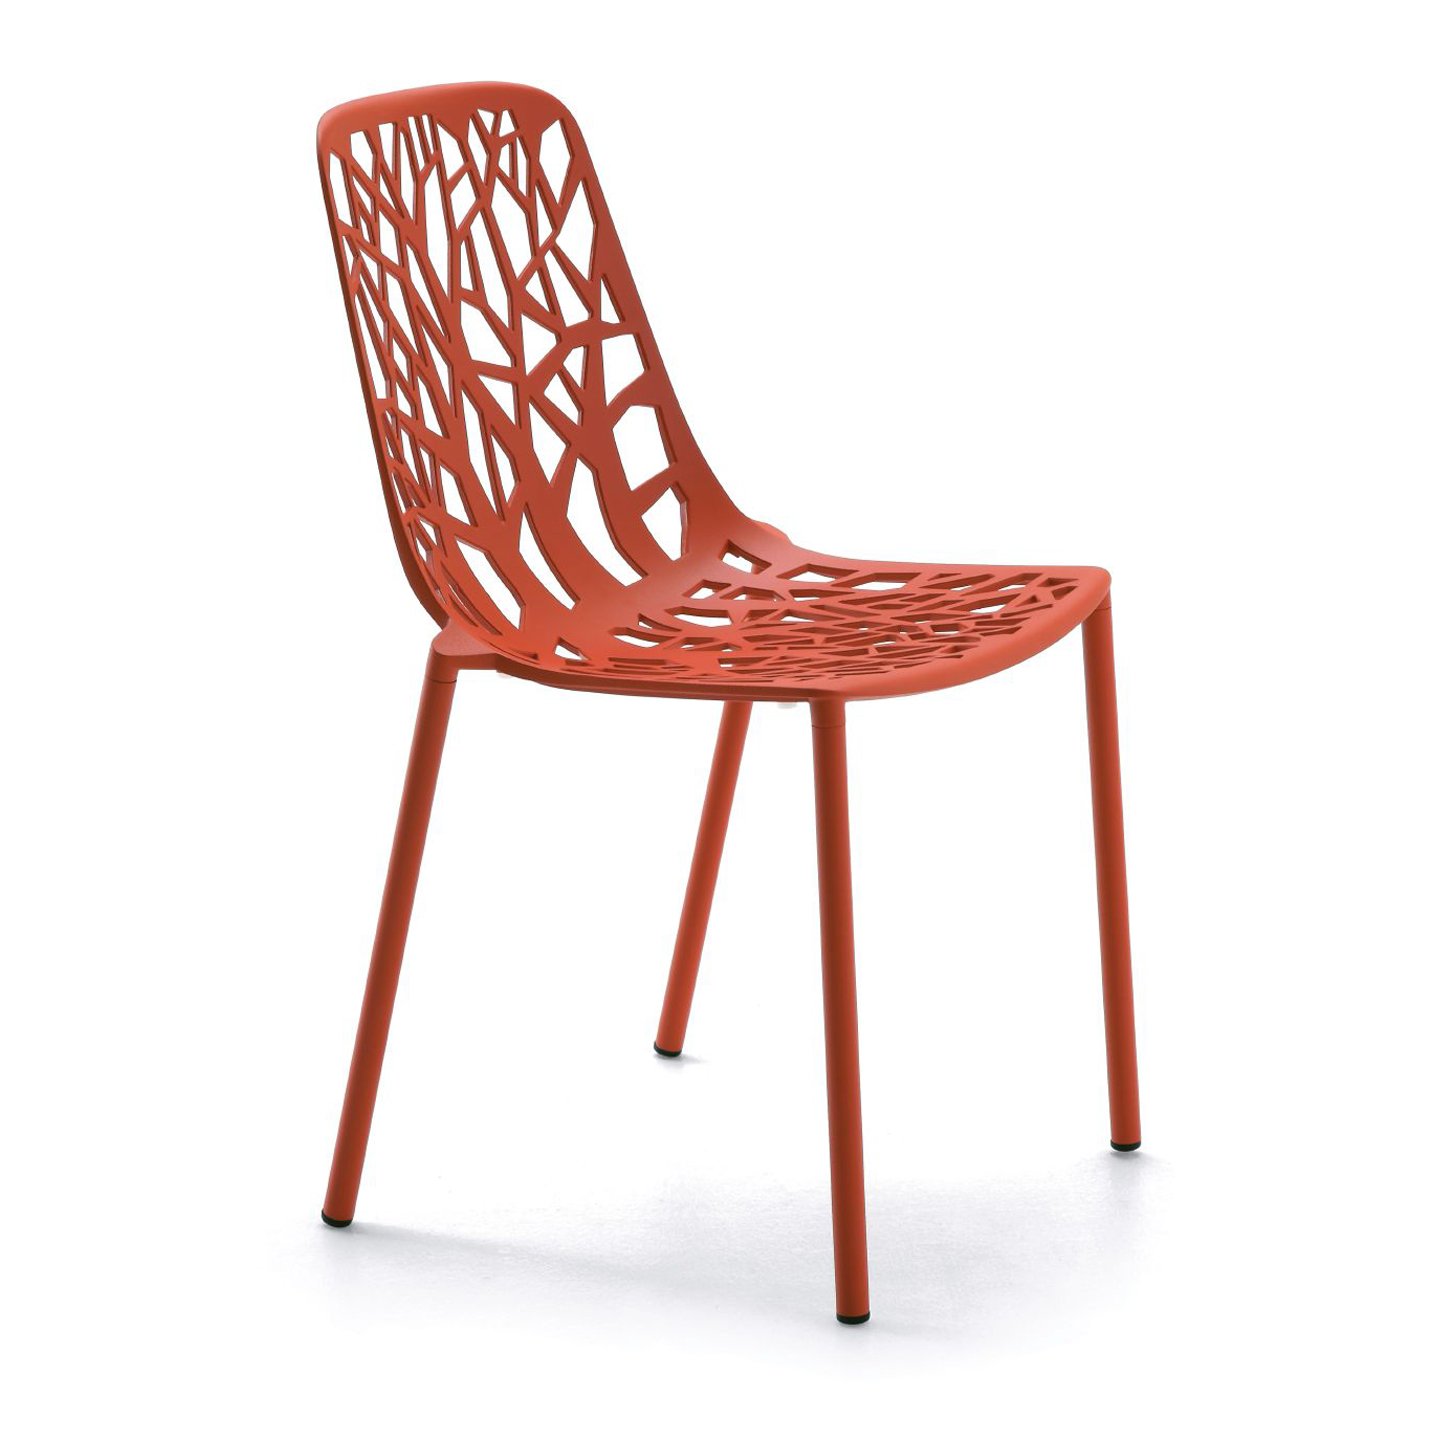 Haworth Forest chair in red color in a side view